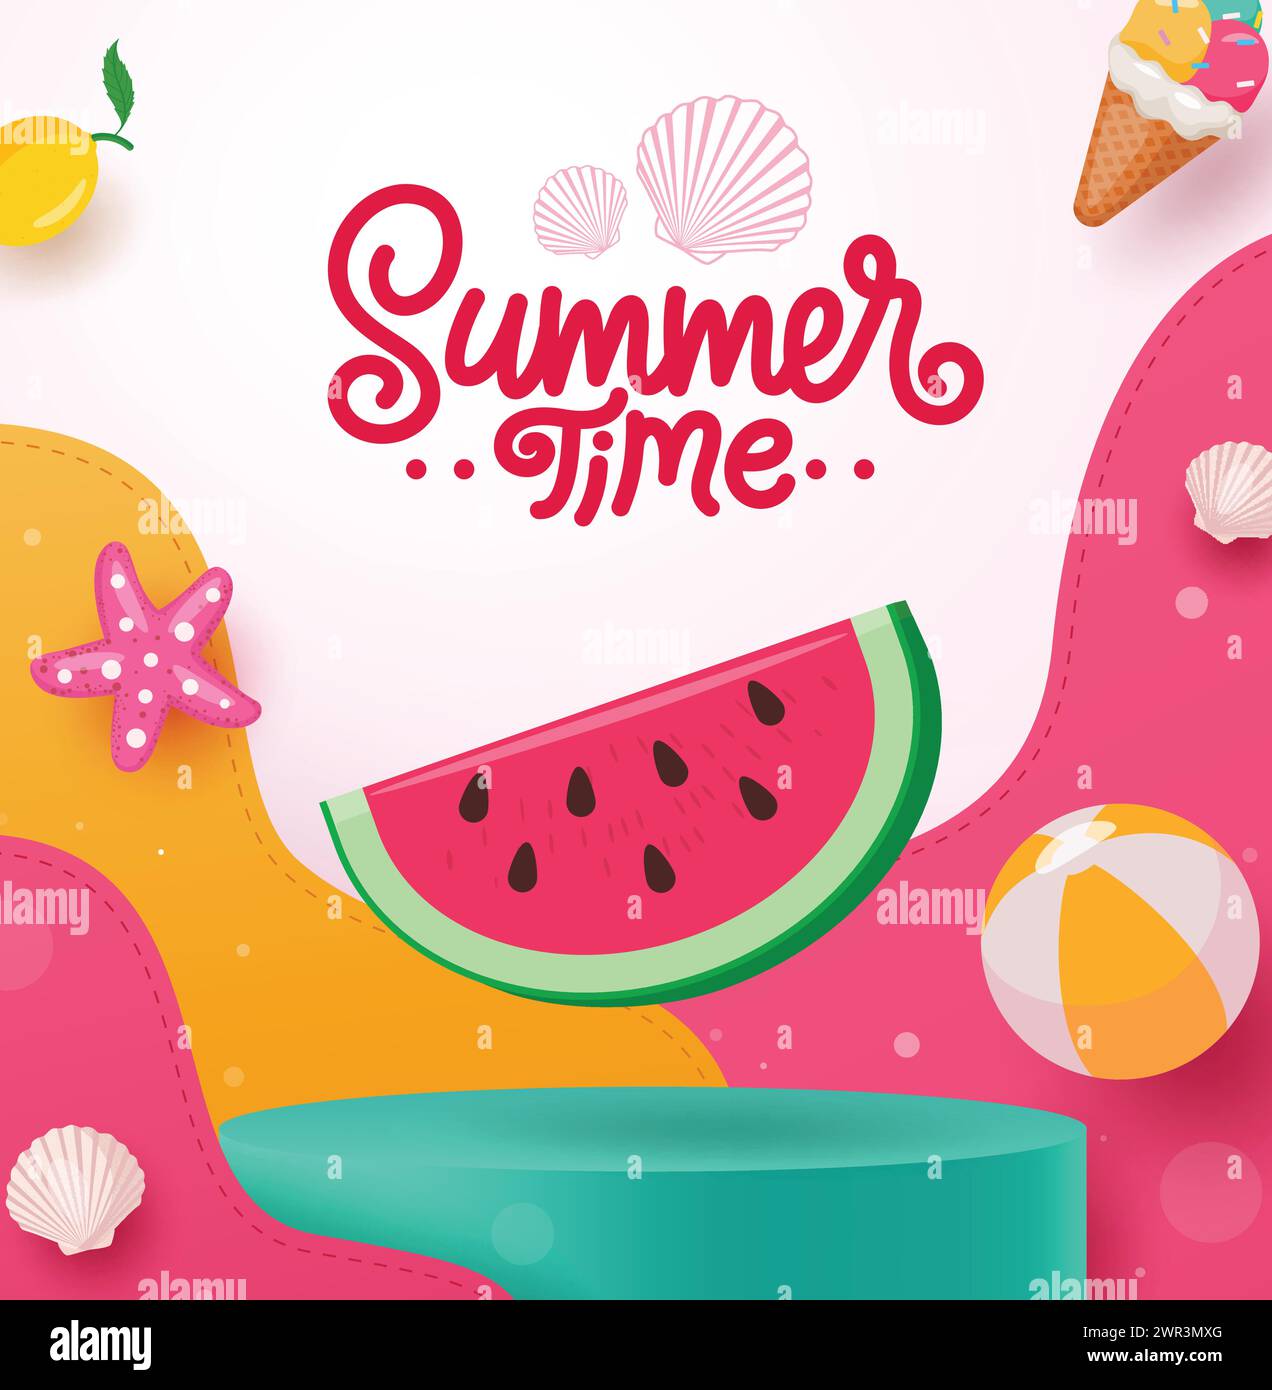 Summer time text vector poster. Summer time greeting with cute watermelon fruit elements in podium stage for product presentation design. Vector Stock Vector